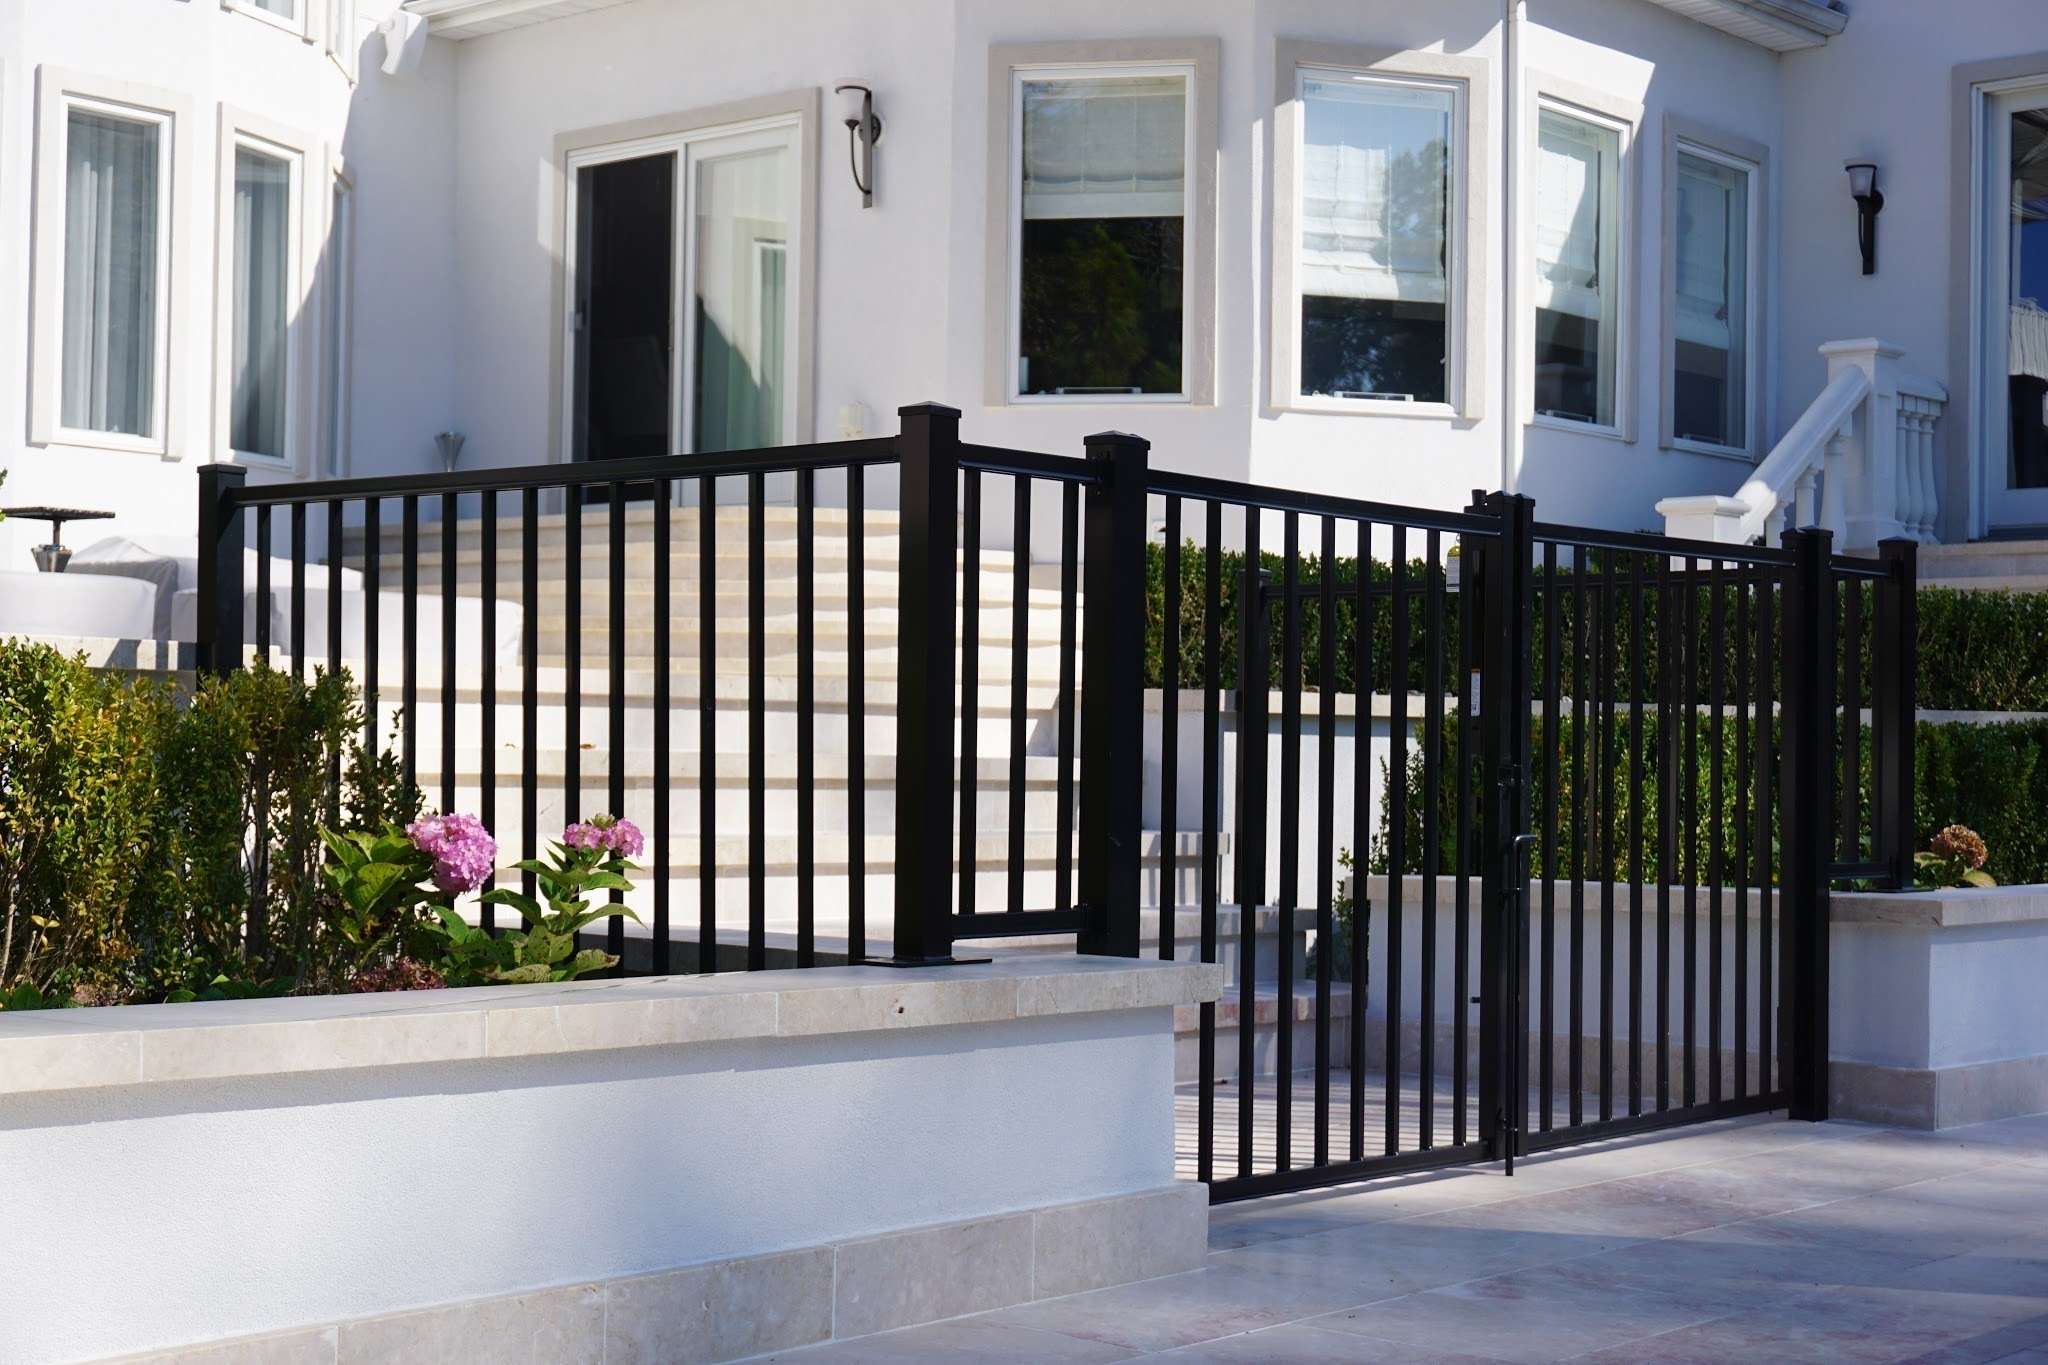 The front porch of a white modern residence with an Ay Bedrock Aluminum Gate